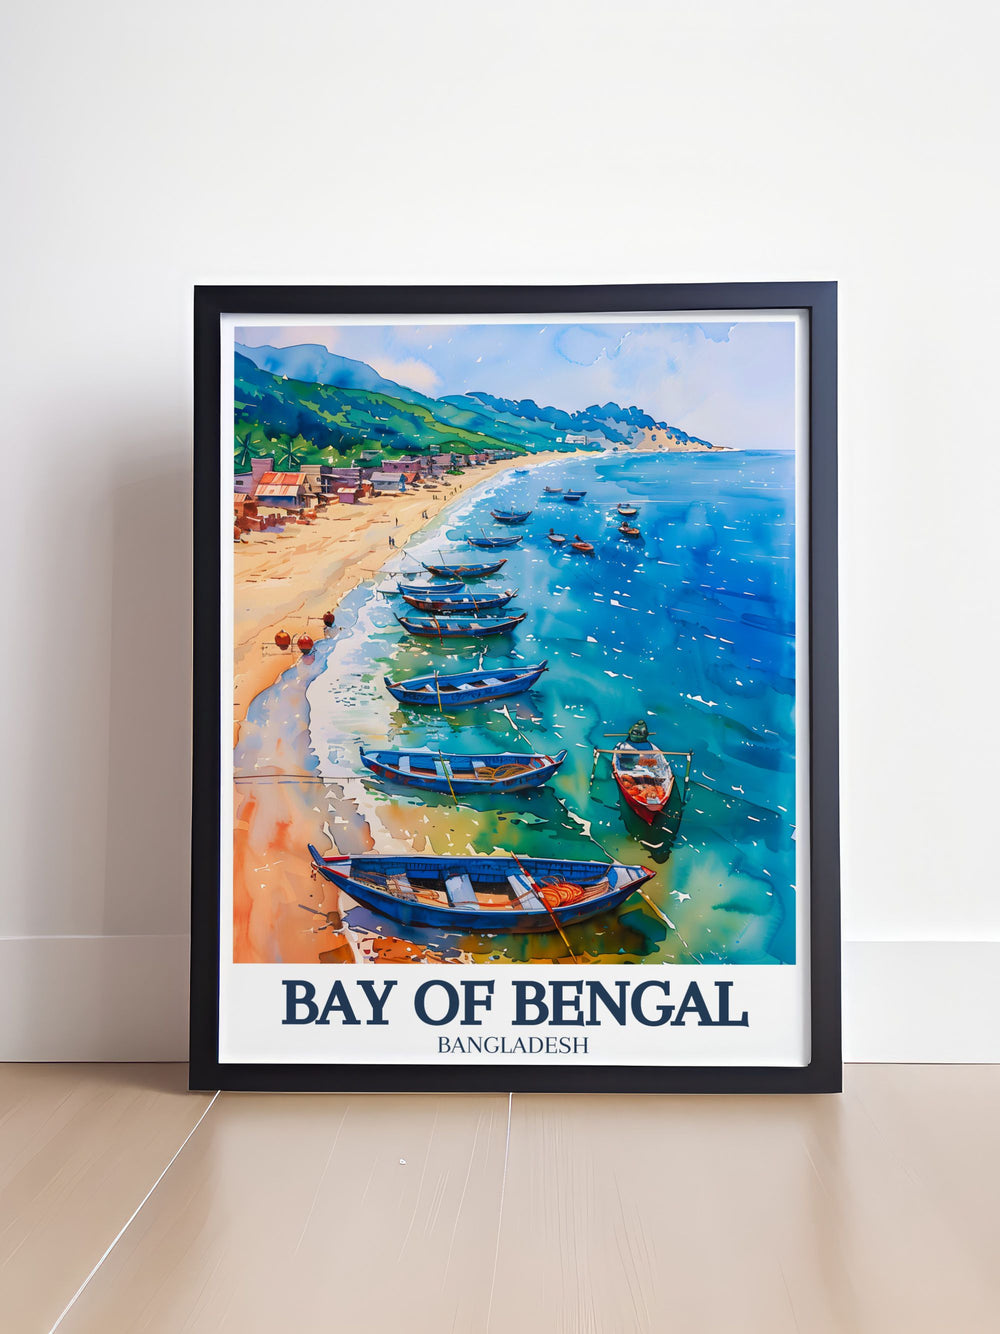 Stunning Buriganga river, Dhaka, Bay of Bengal wall art featuring fine line prints and intricate designs showcasing the essence of Bangladesh ideal for home decor and thoughtful gifts.